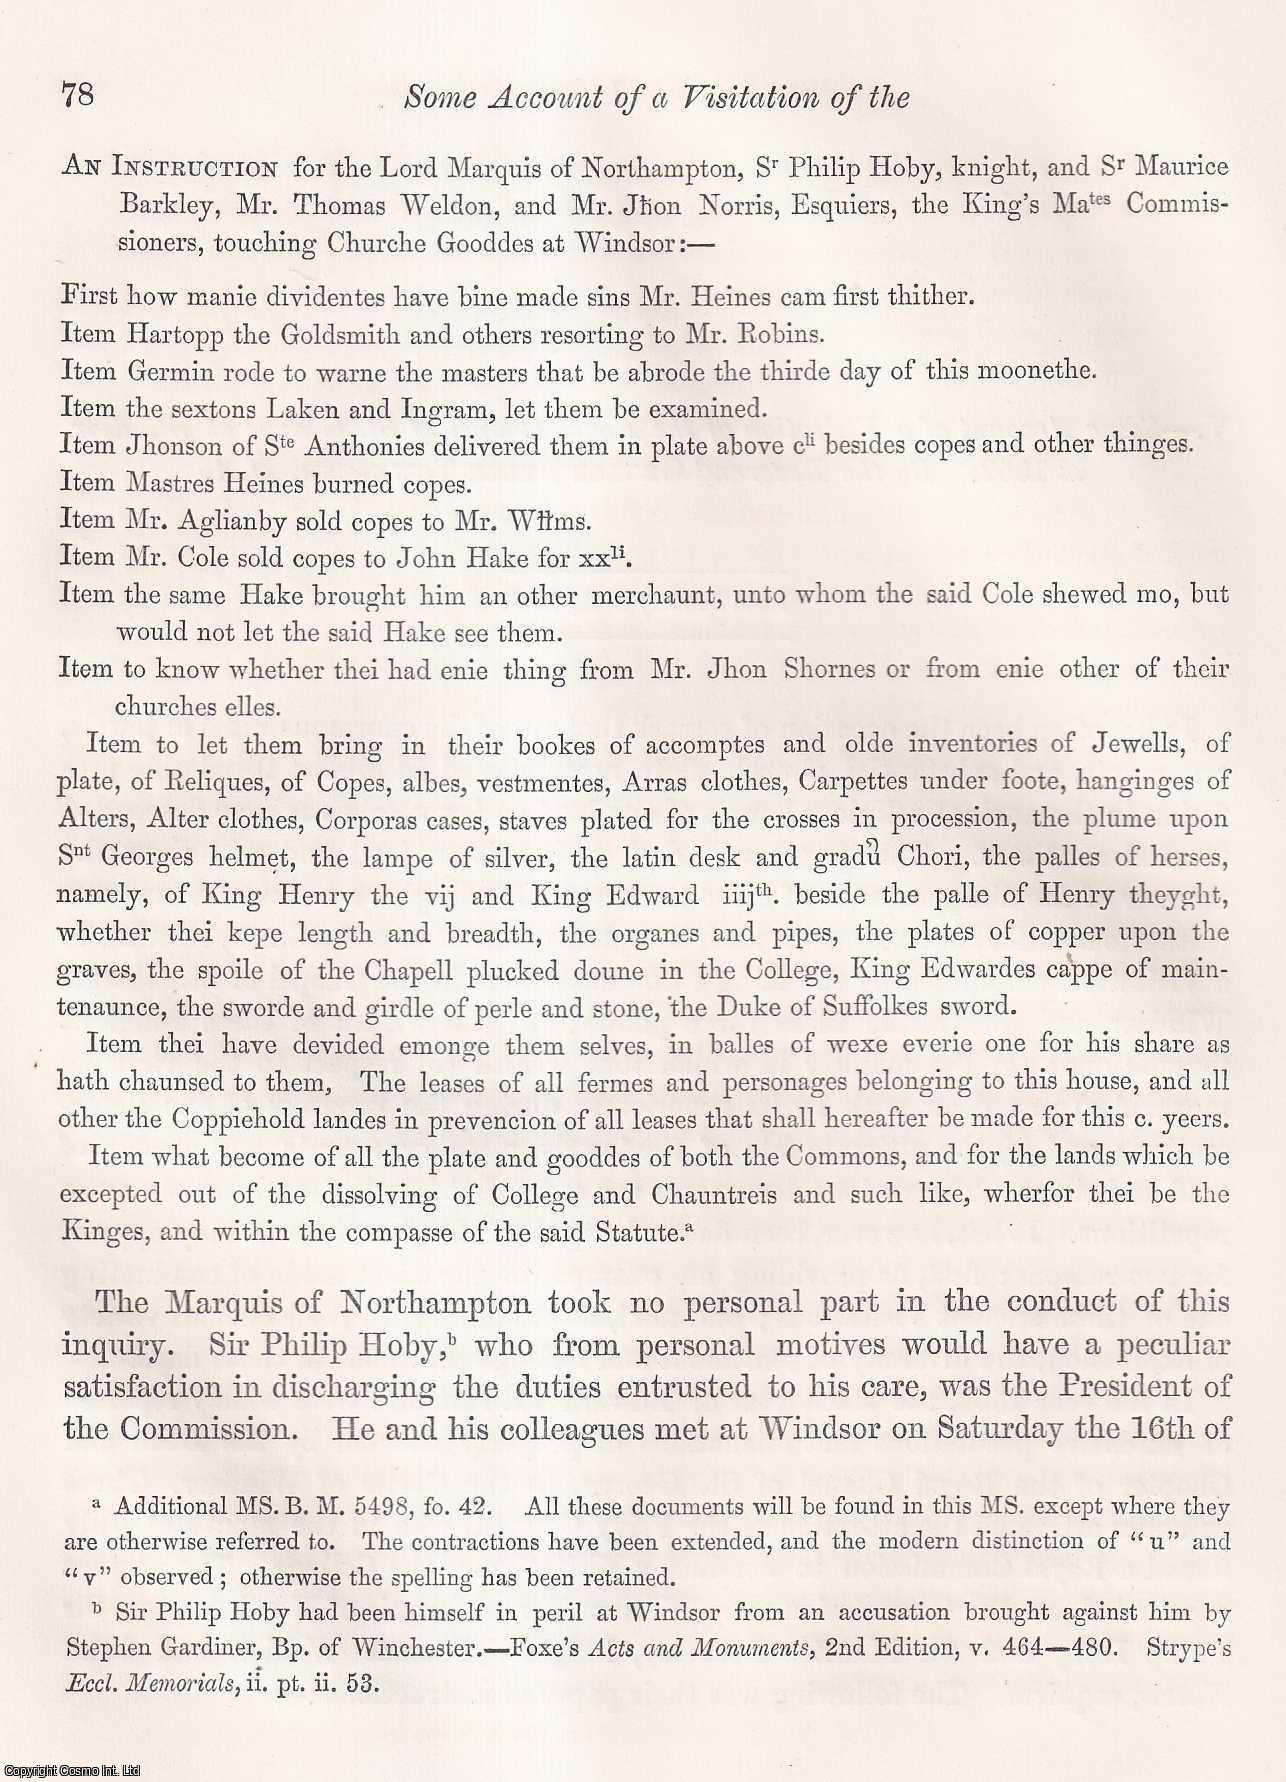 Rev. George Fyler Townsend, M.A. - A Visitation of the Royal Chapel of St. George at Windsor, in 1552. An uncommon original article from the journal Archaeologia, 1869.